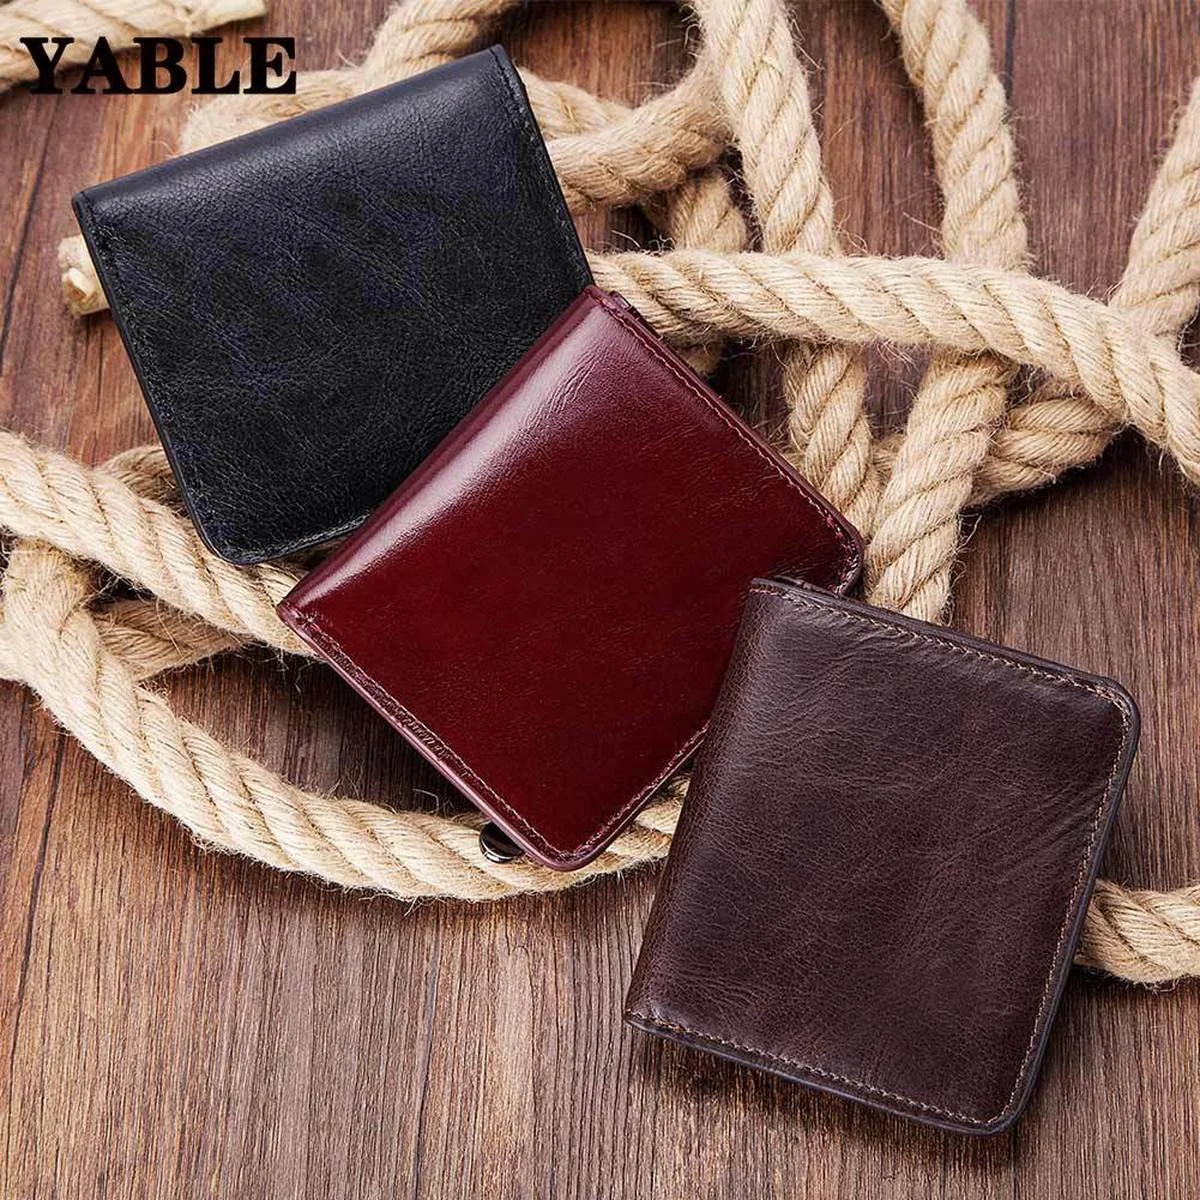 Hot Selling Men's Wallet Short Genuine Leather Purse First Layer Cowhide Leather Bag